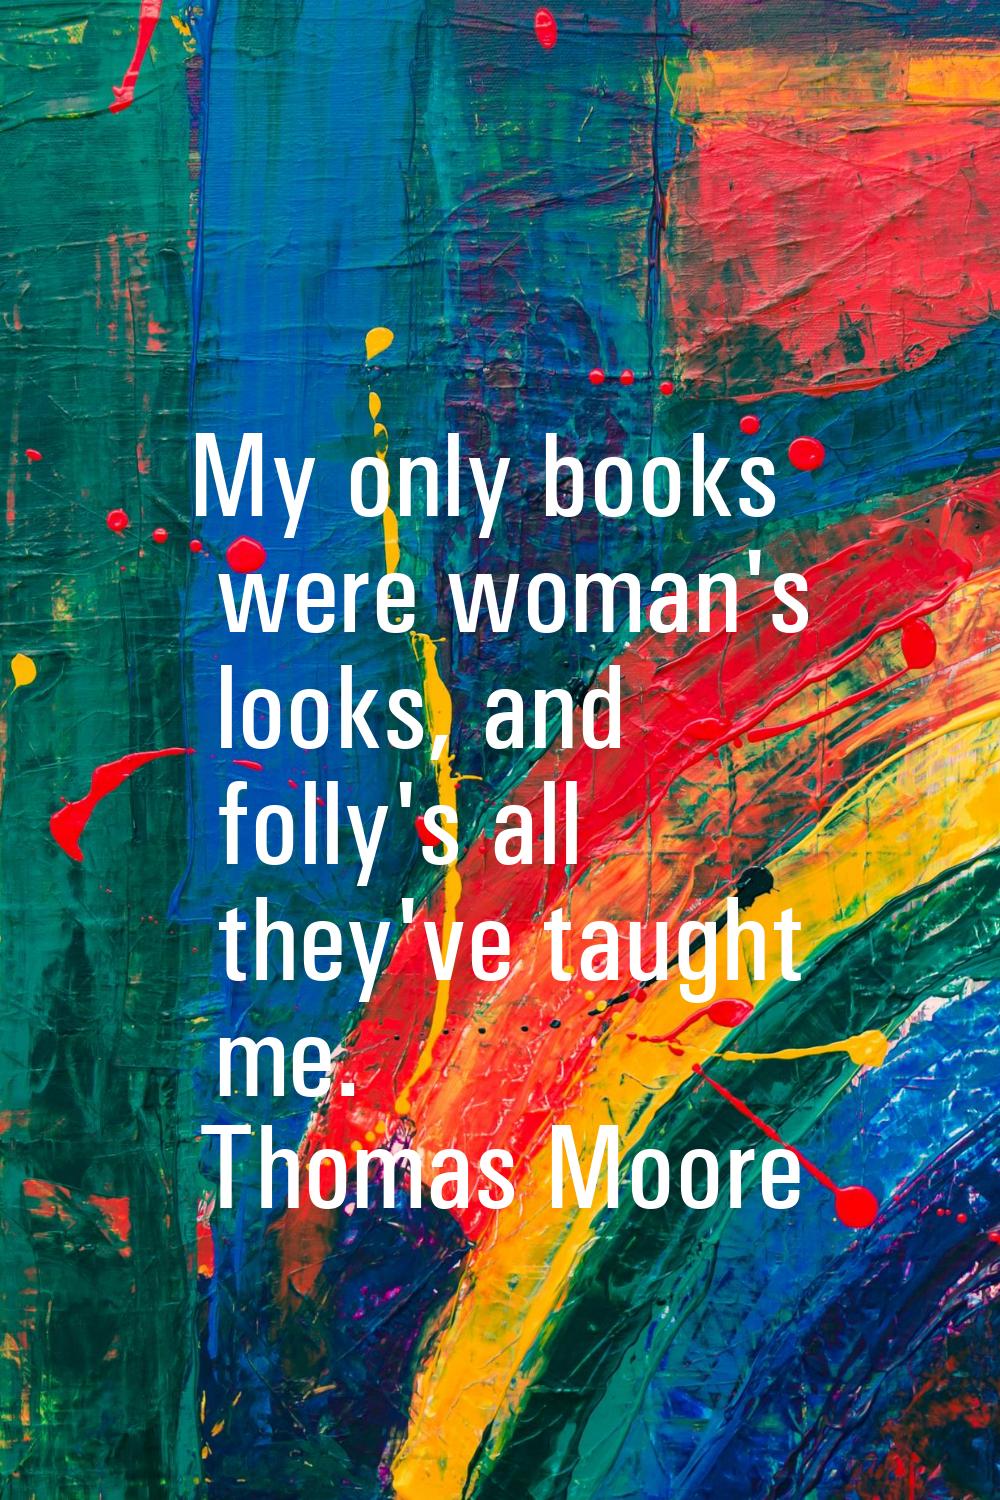 My only books were woman's looks, and folly's all they've taught me.